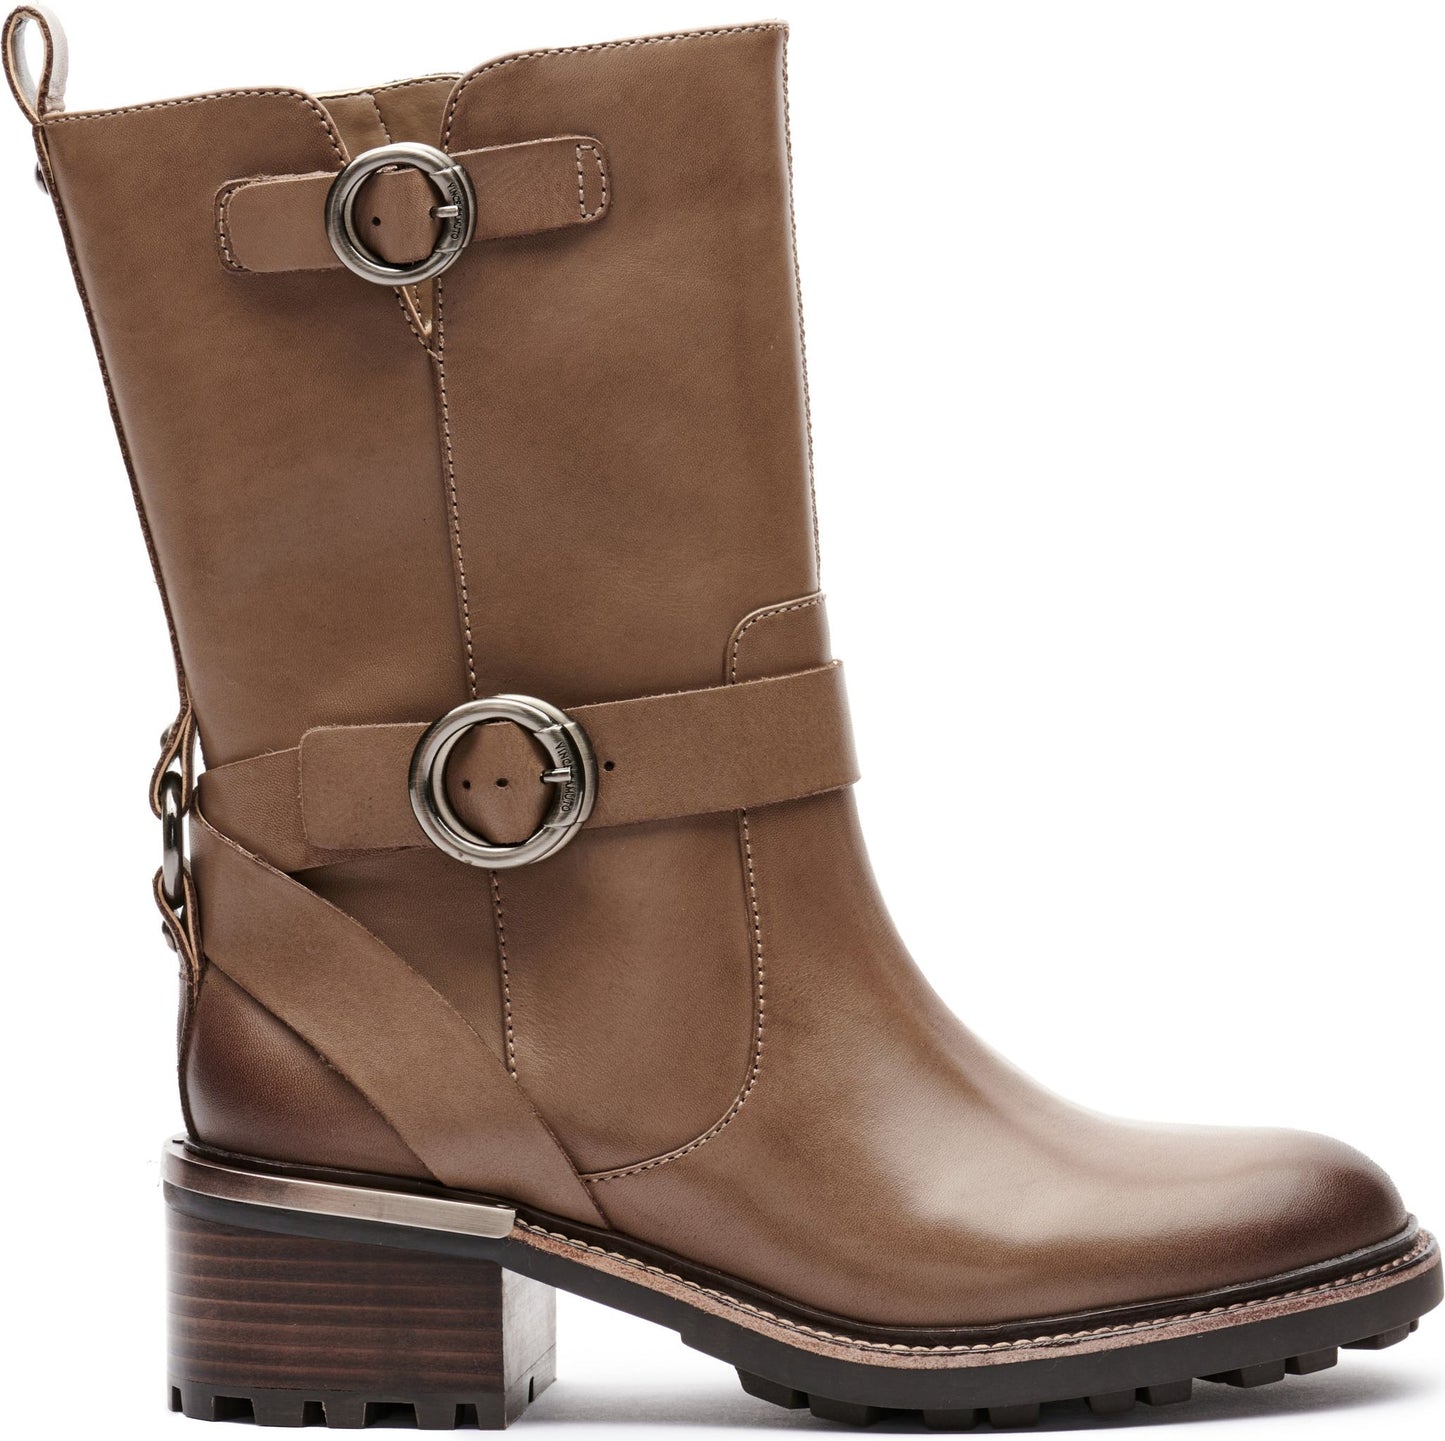 Vince Camuto Boots Kerivini Burnished Leather Tuscan Taupe